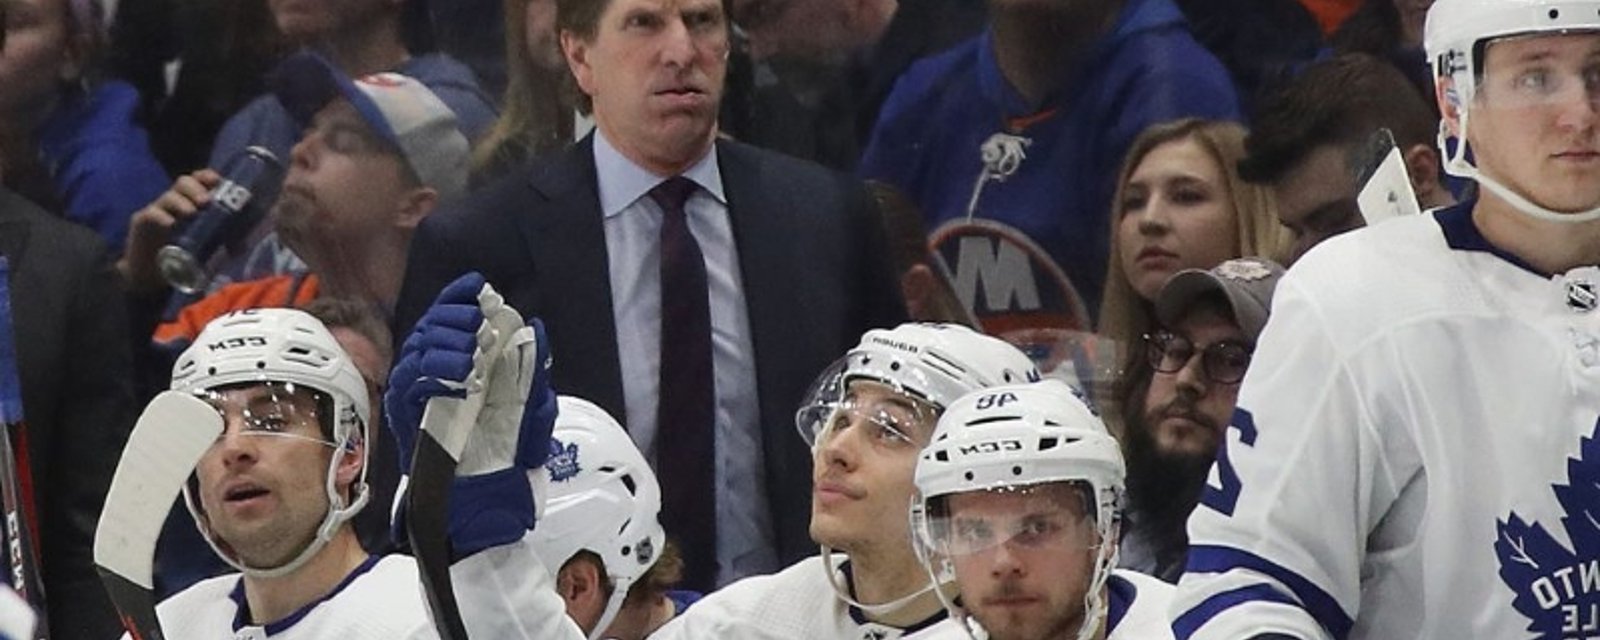 Many expect Dubas to fire Babcock this offseason